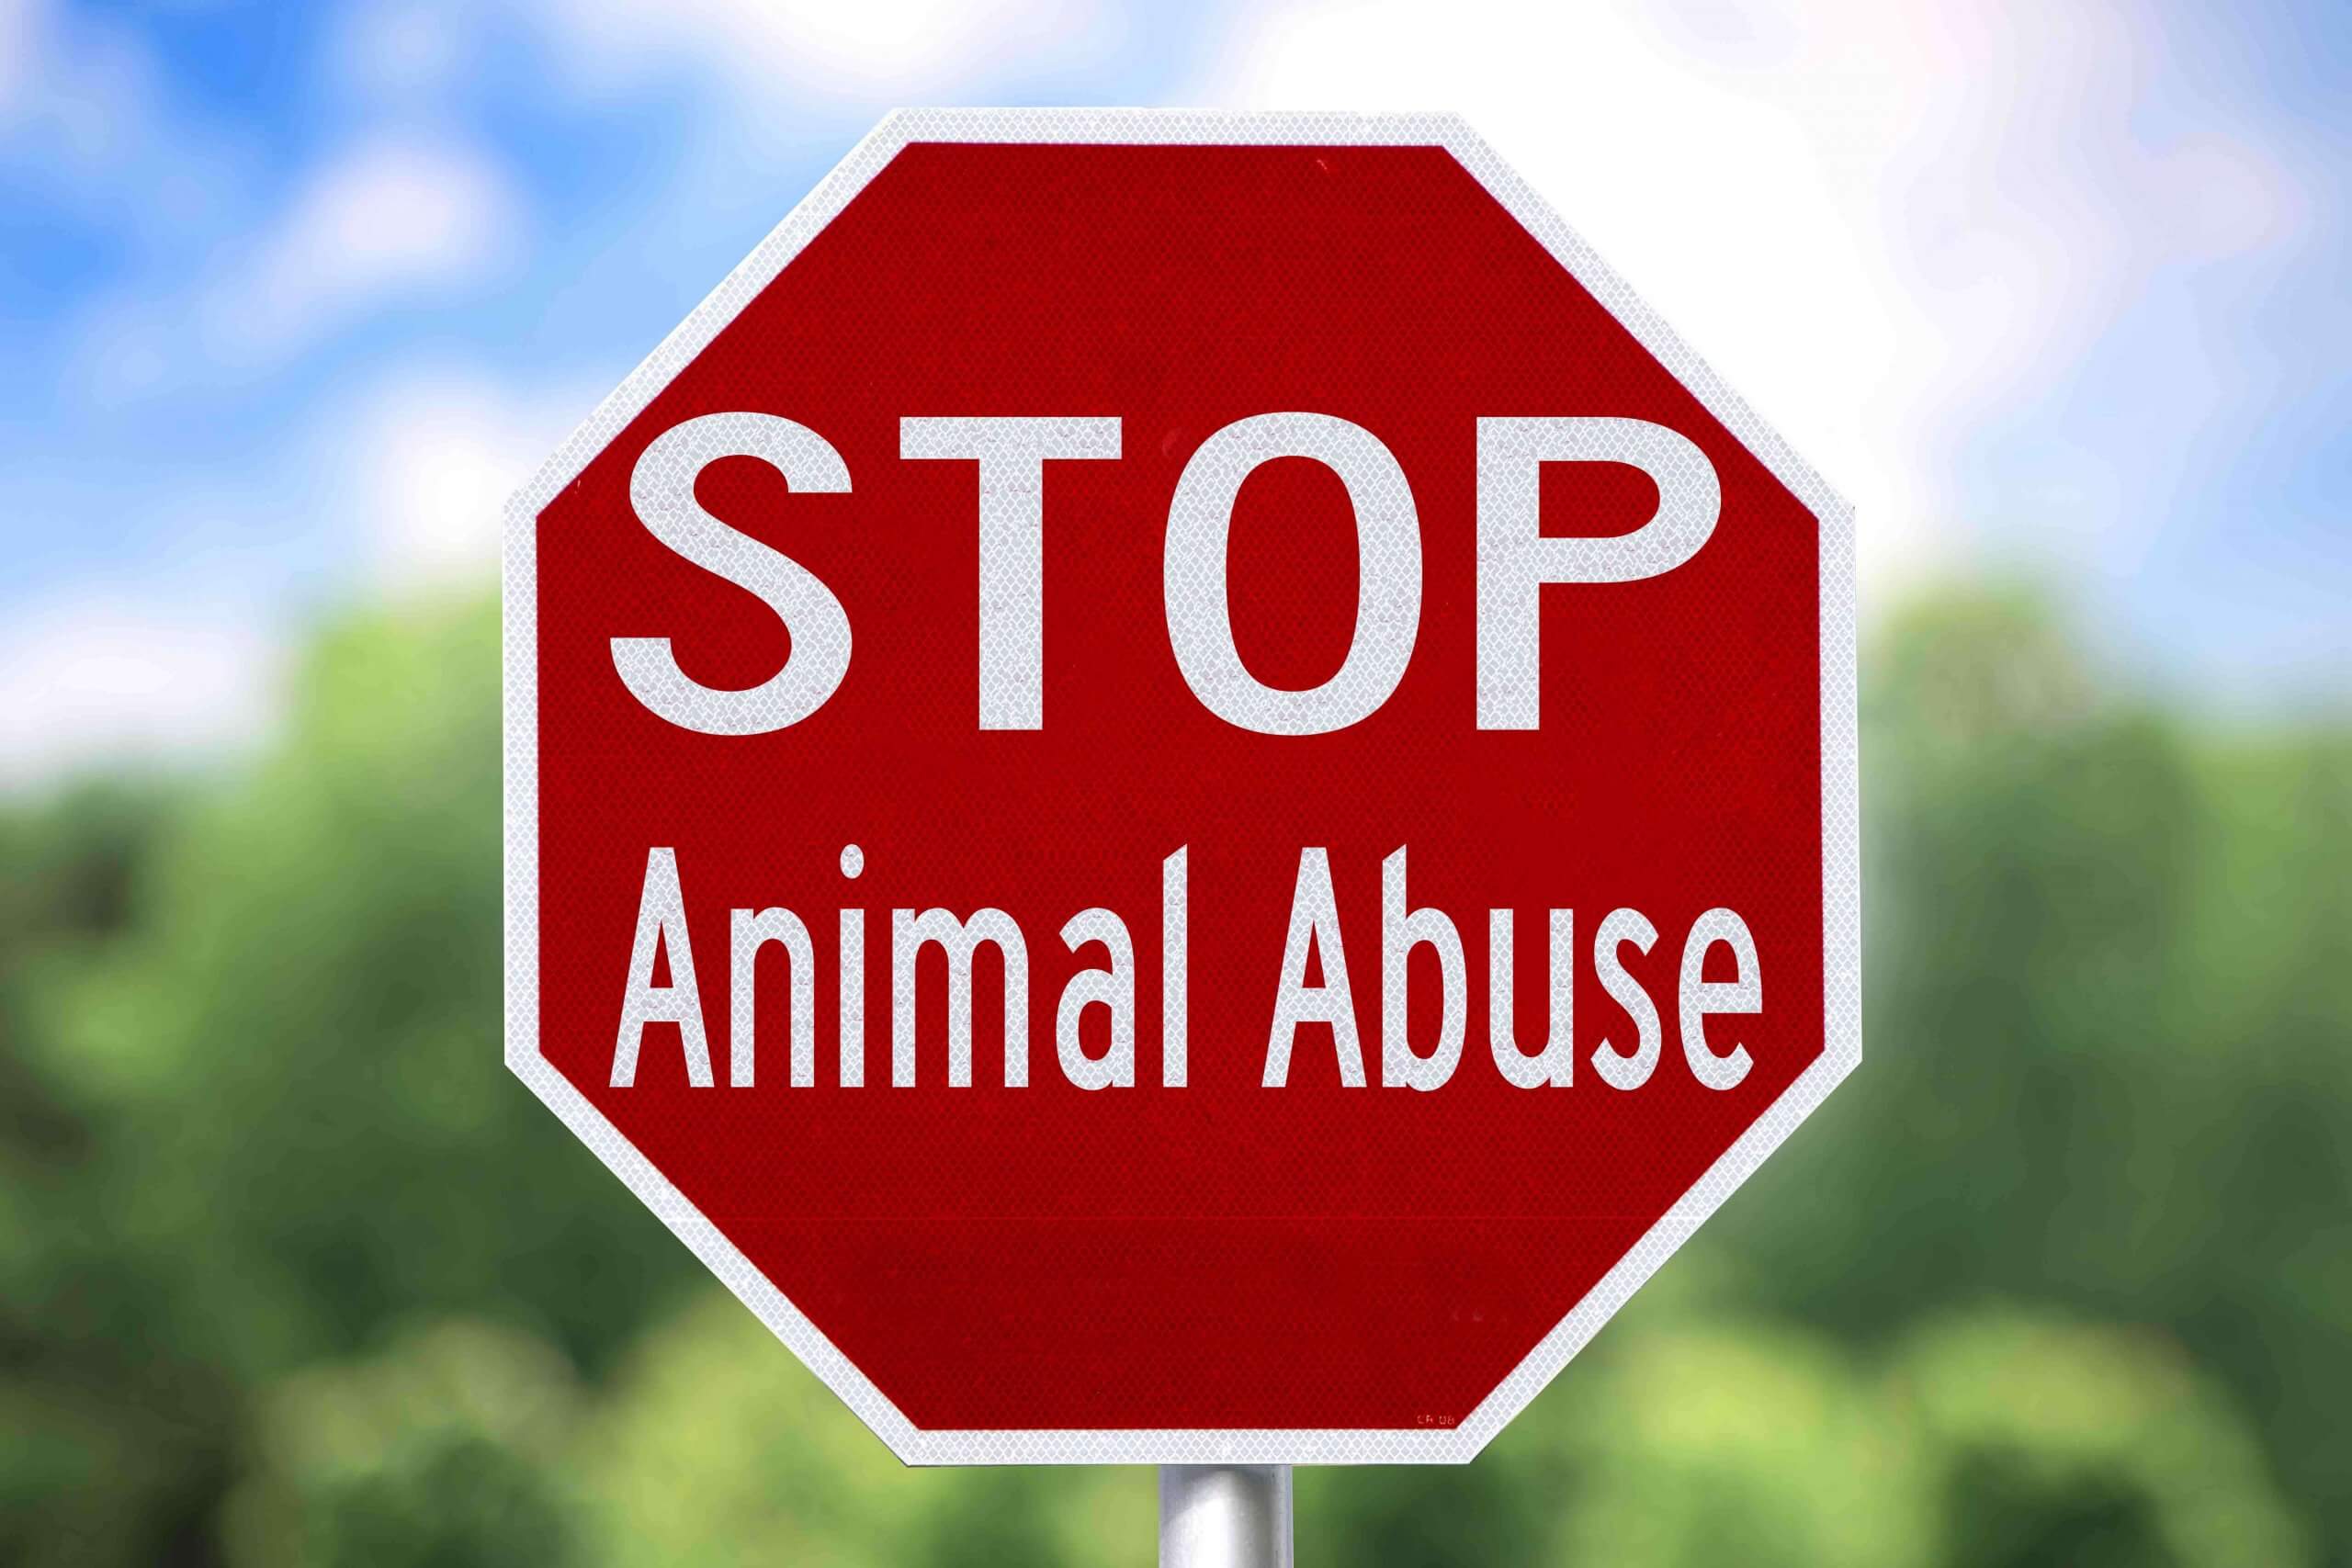 A "stop animal abuse" sign.